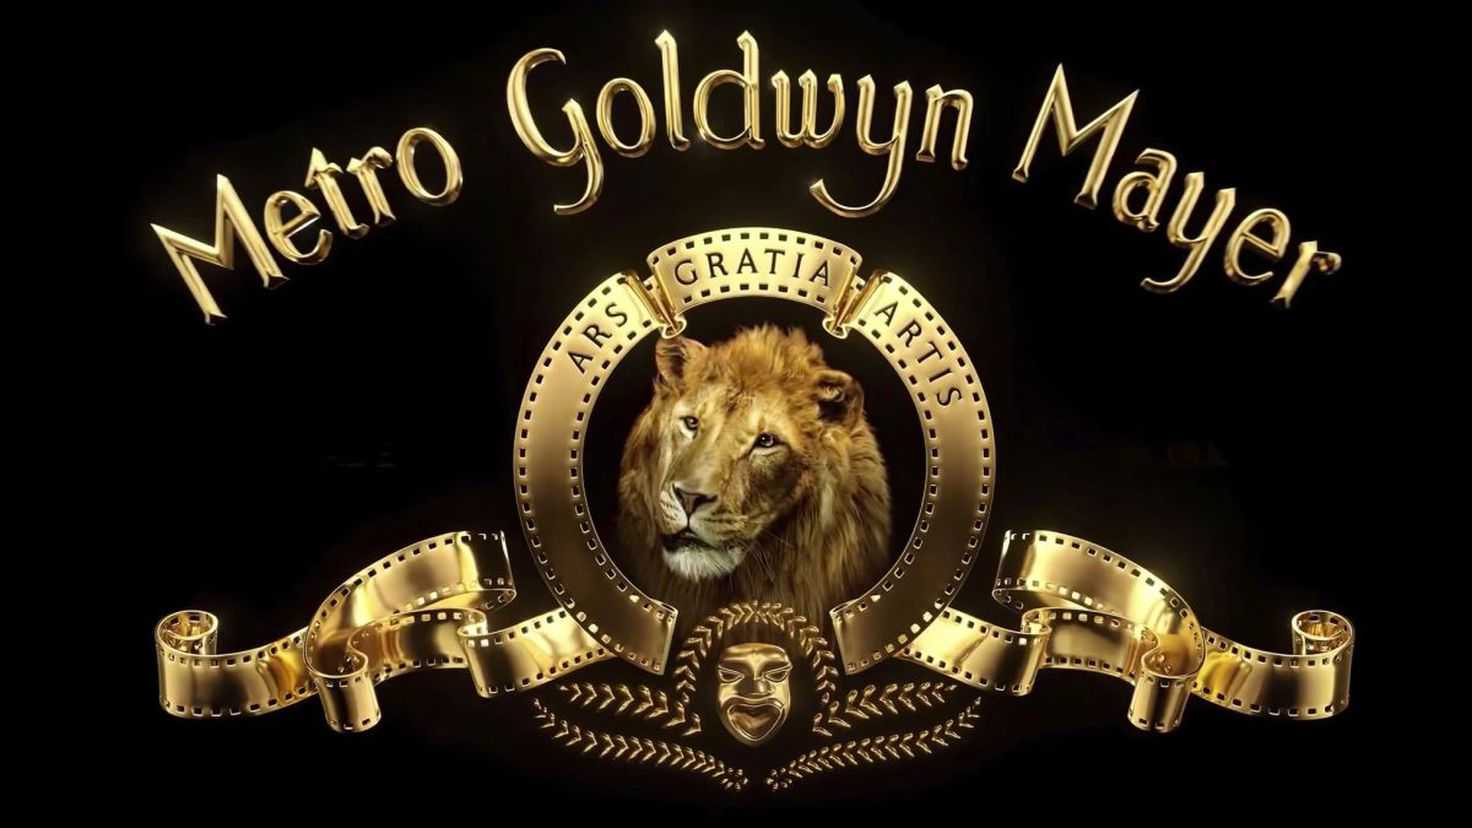 Mgm holdings